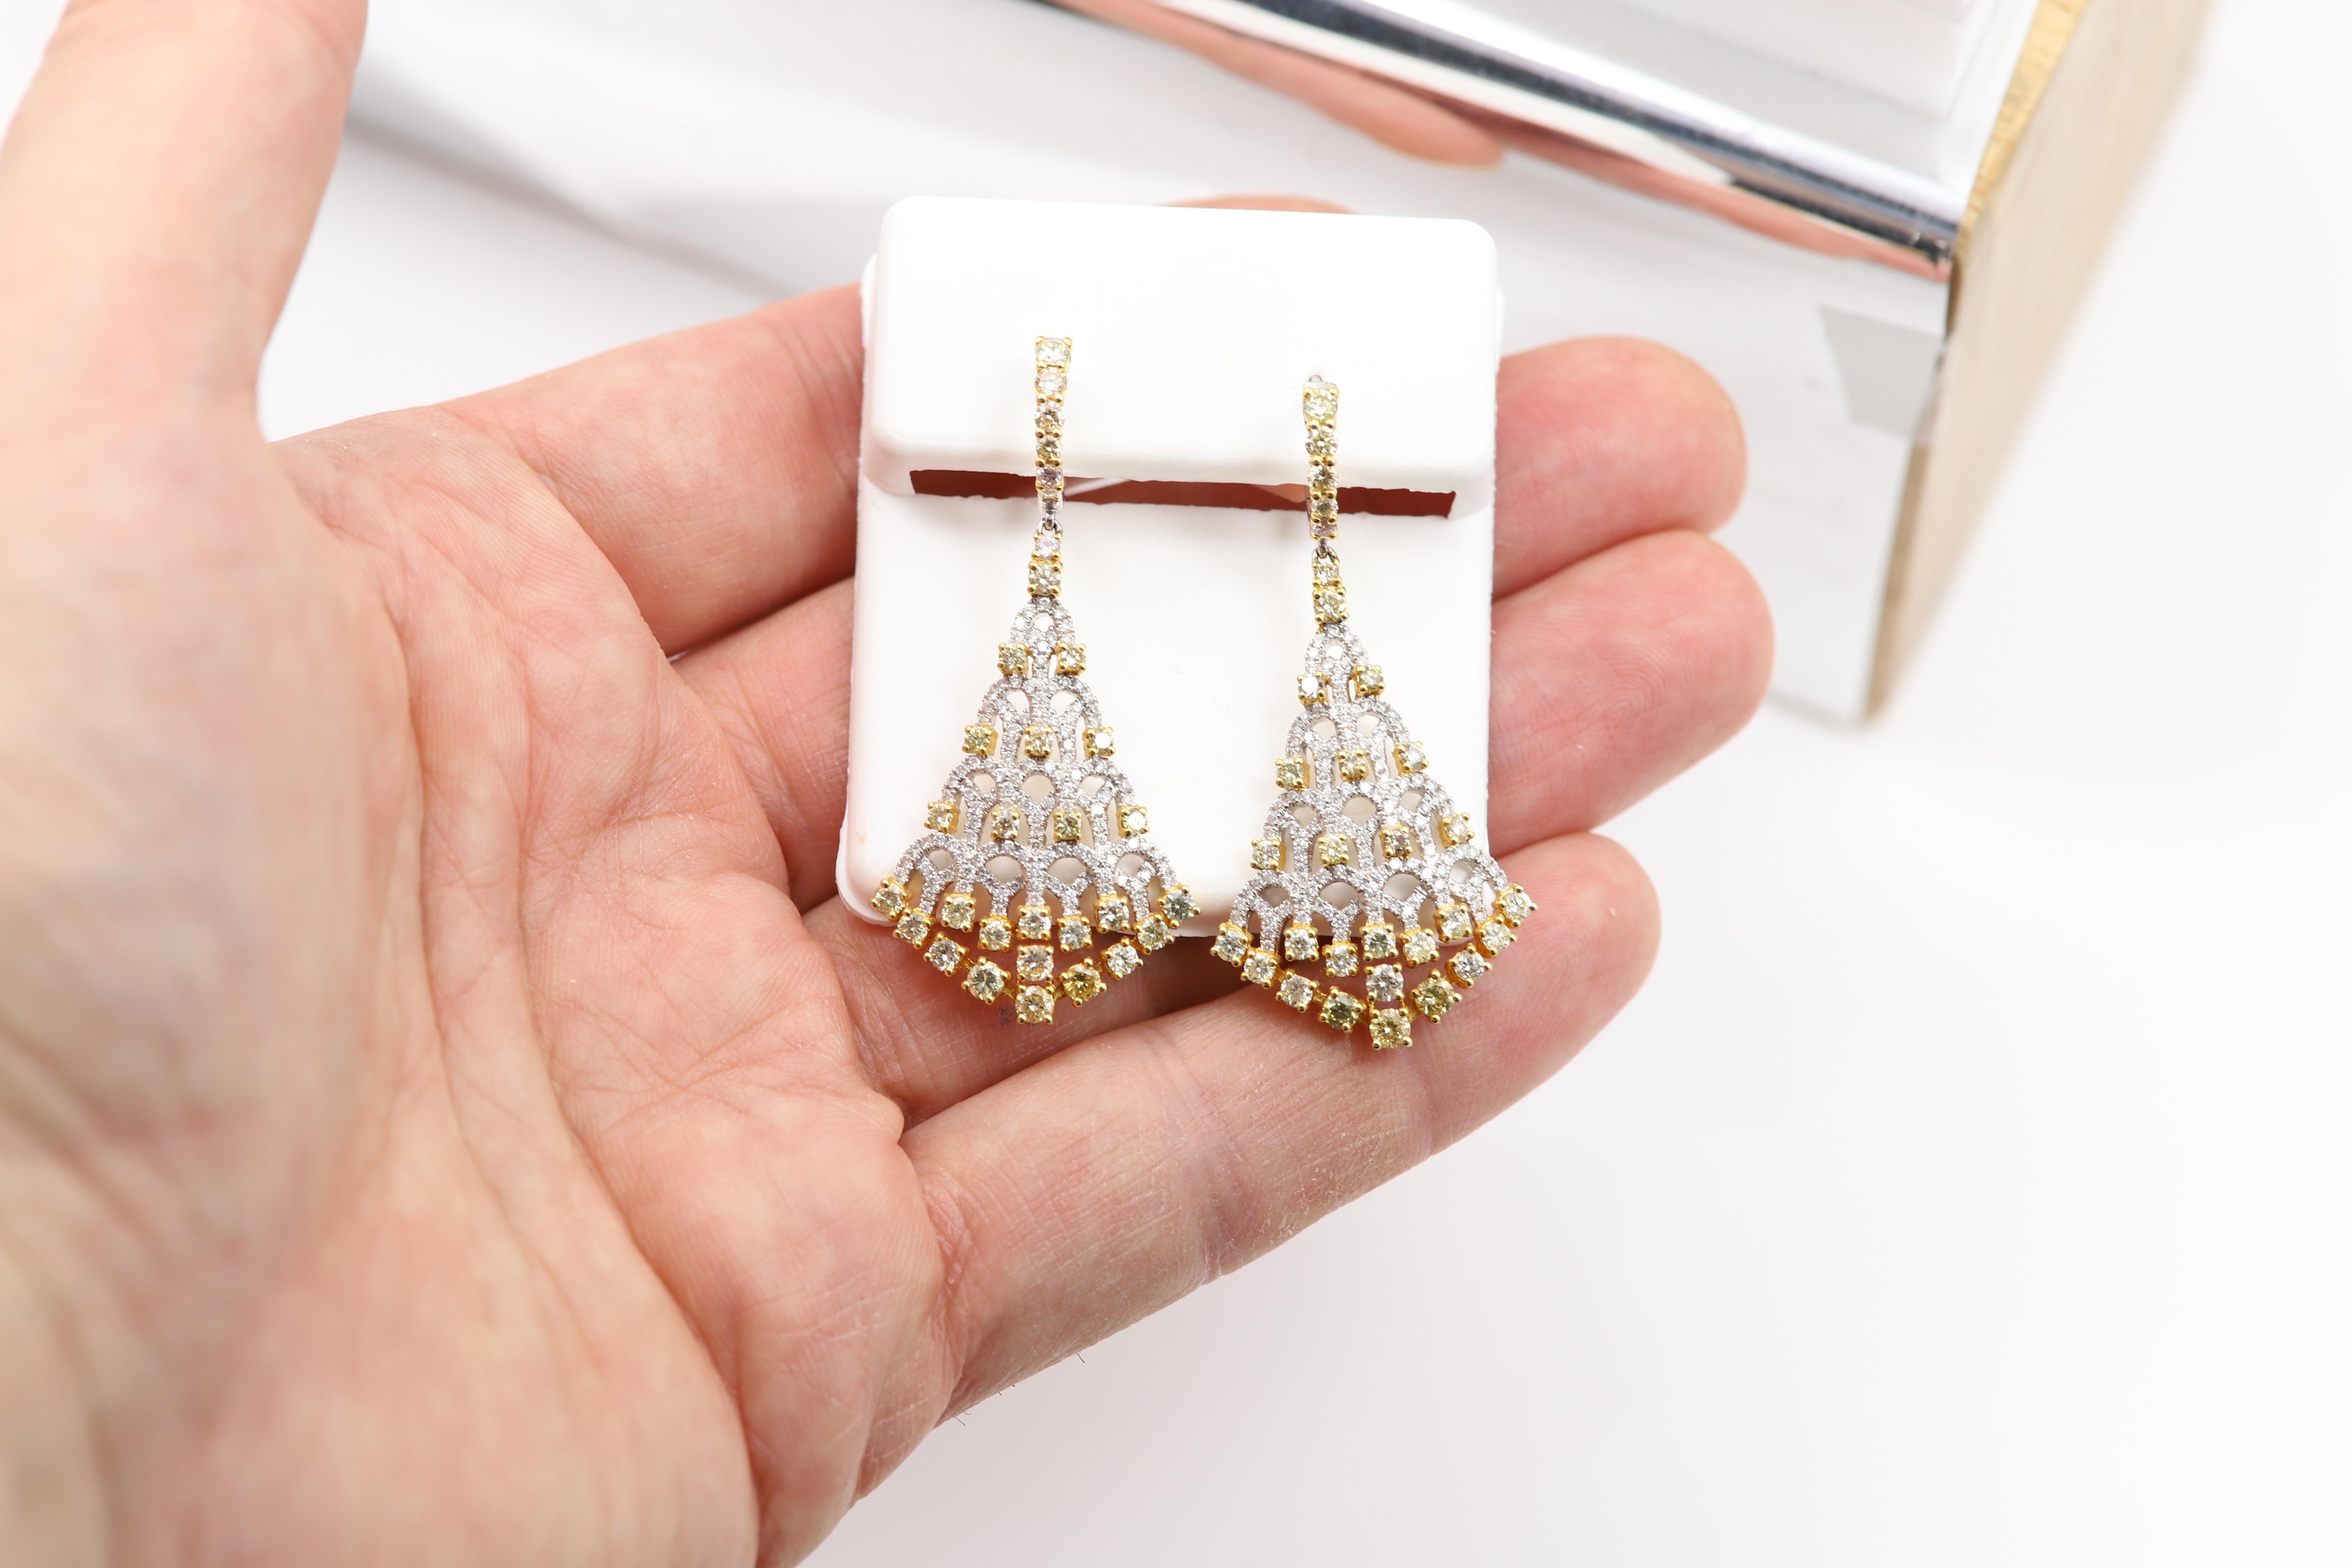 Elegant Yellow Diamonds Chandelier Earrings
Dangling Brilliant Diamonds 

Light Yellow, Yellow-ish, Green-ish and White Diamonds - all natural diamonds
18k White and Yellow gold- Two tone.
Total Gold weight  12.3 grams

Total White Diamonds 1.04